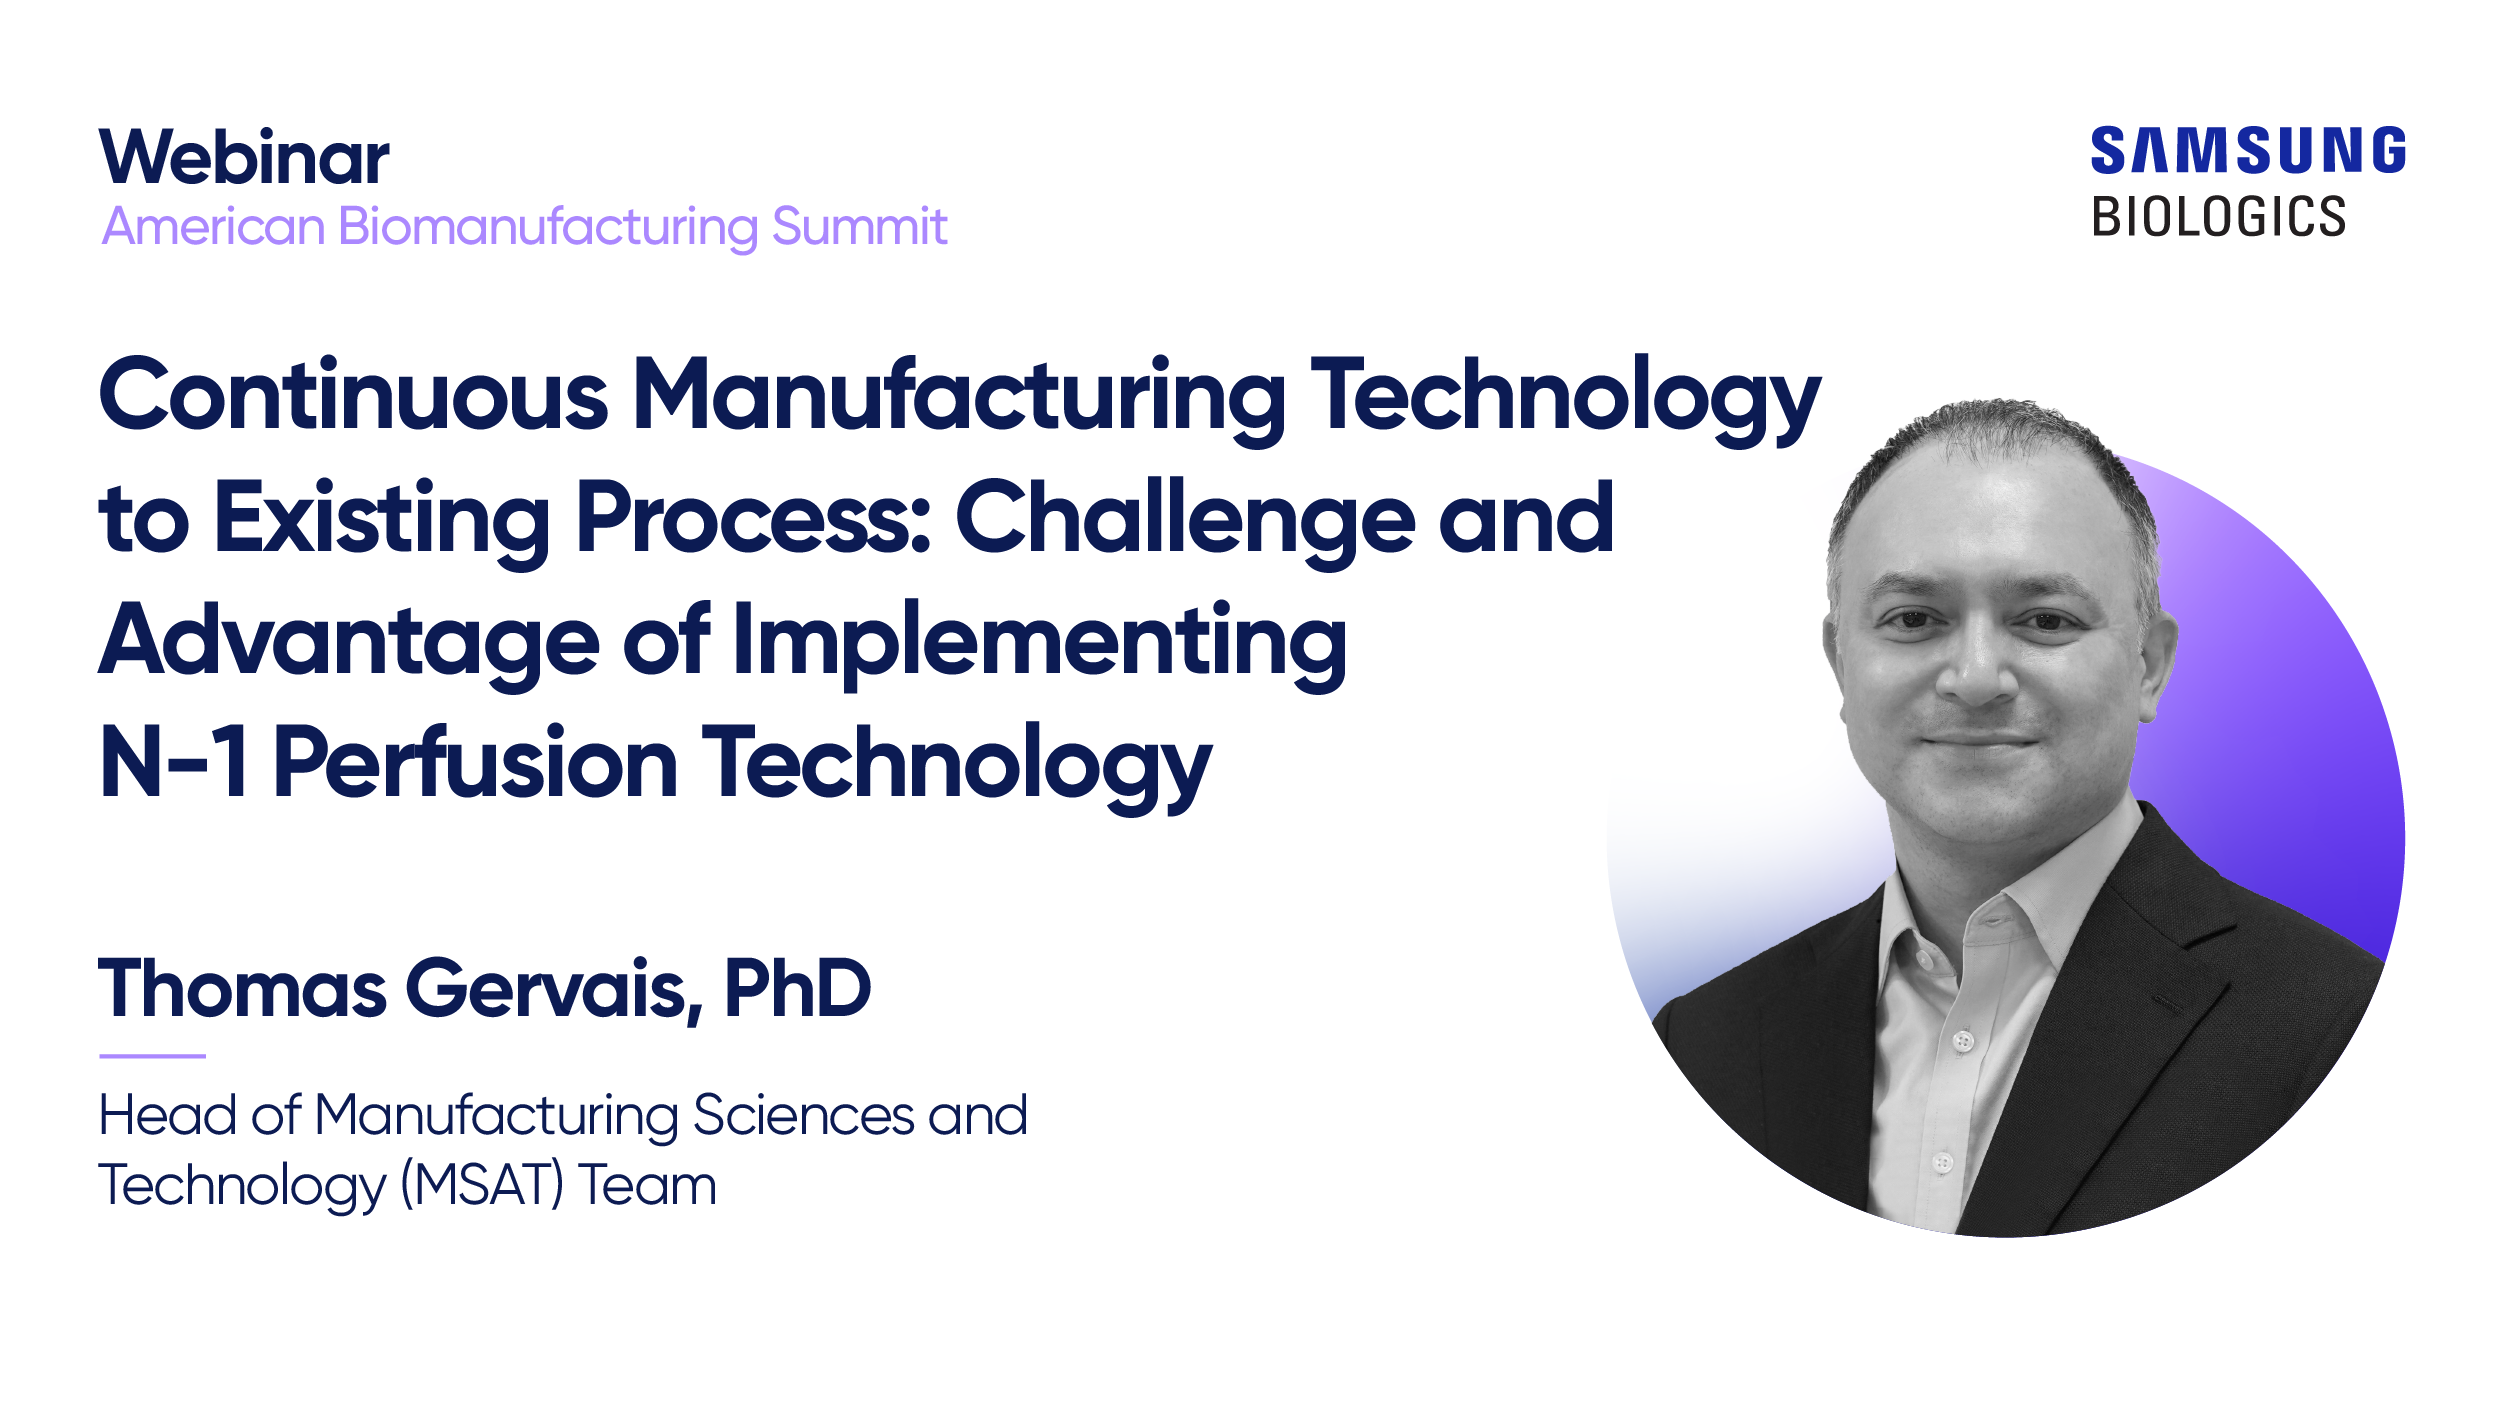 Continuous Manufacturing Technology to Existing Process: Challenge and Advantage of Implementing N-1 Perfusion Technology